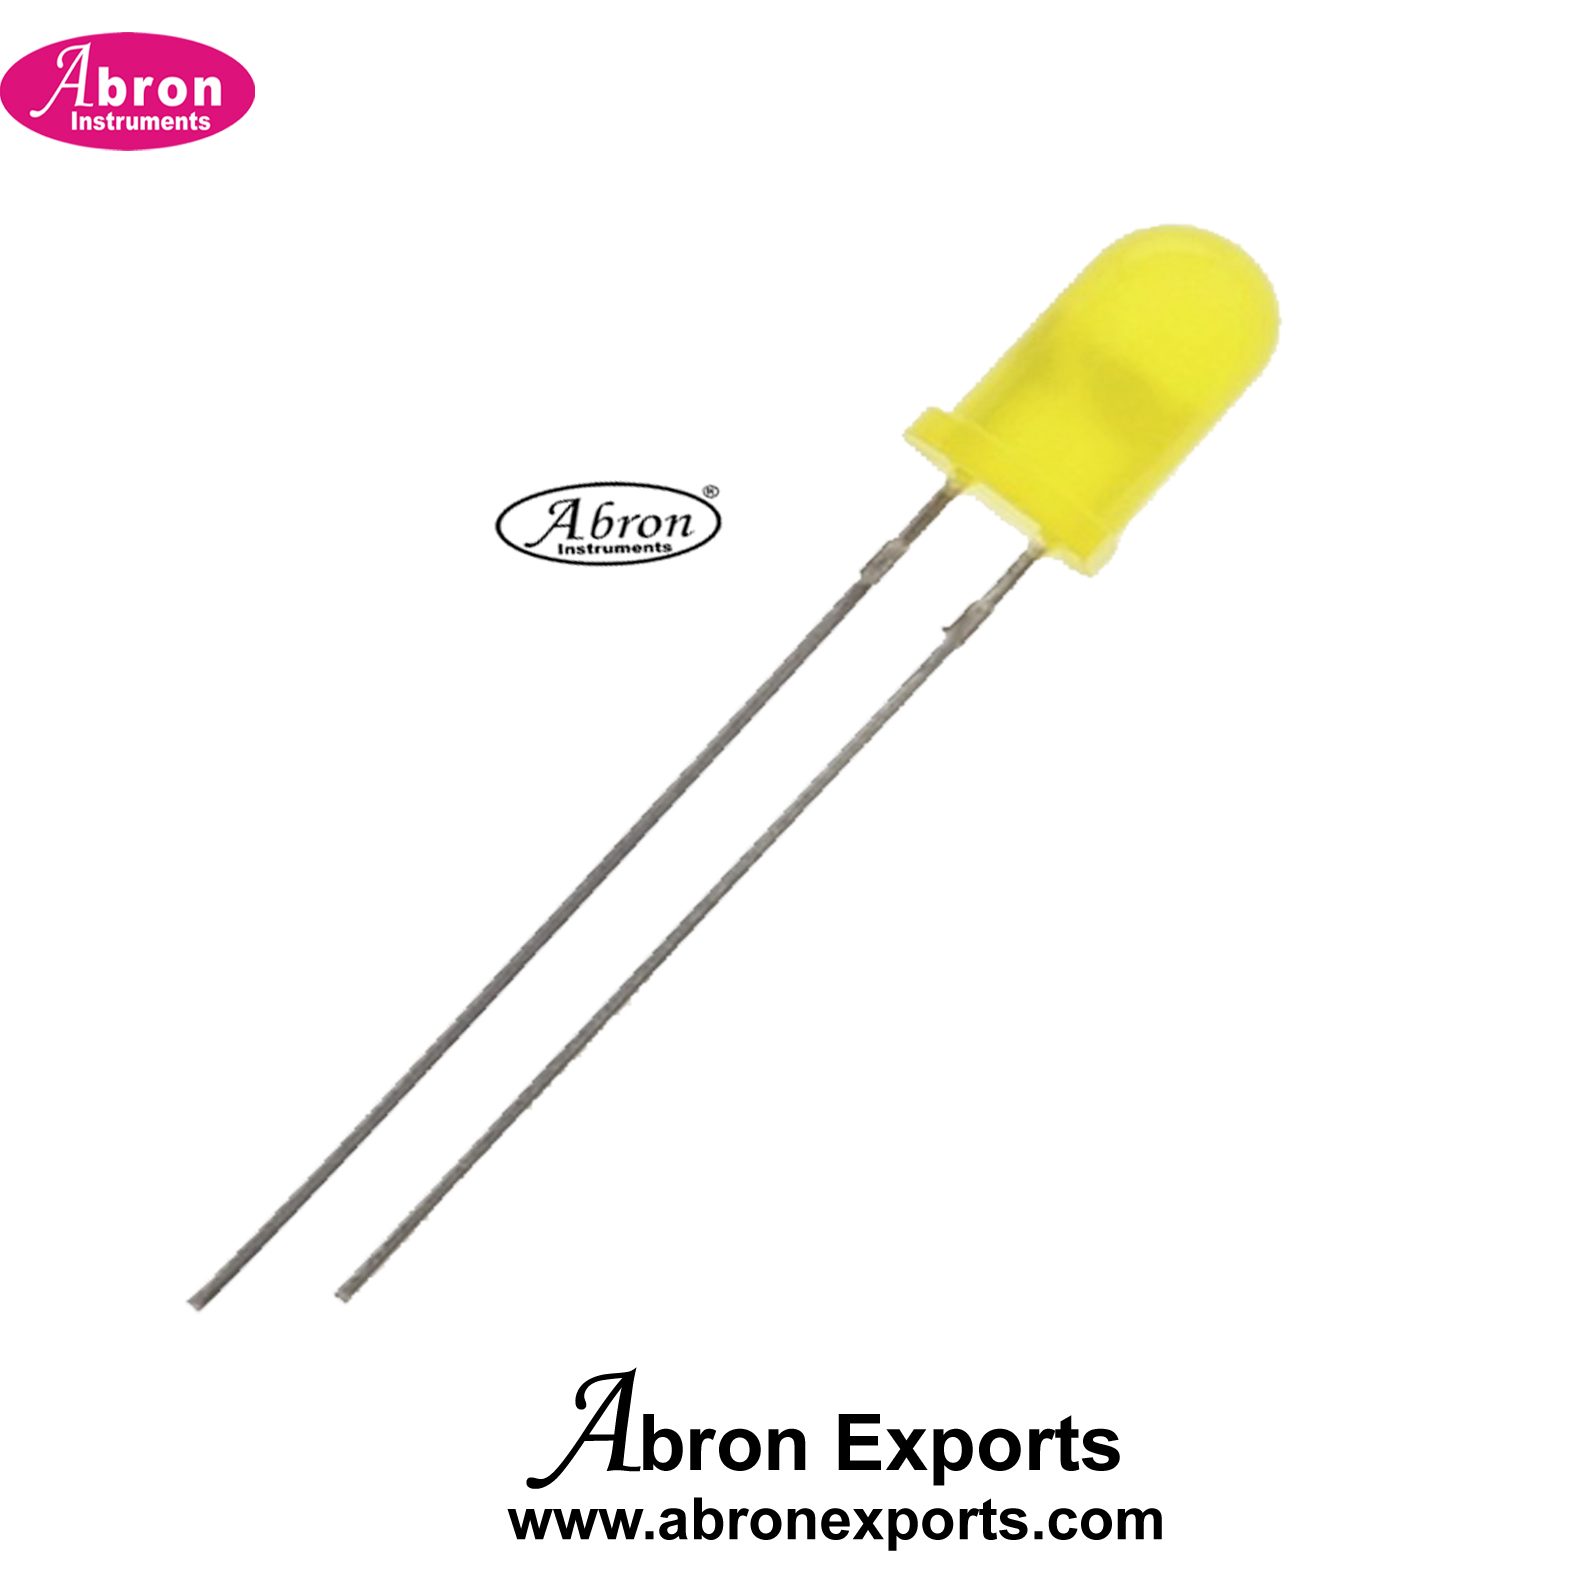 LED Yellow 1.5V Colorful Pack of 10 5mm LED Light any one White, Green, Red, Yellow, and Blue Colors A Abron AE-1224LEDY 